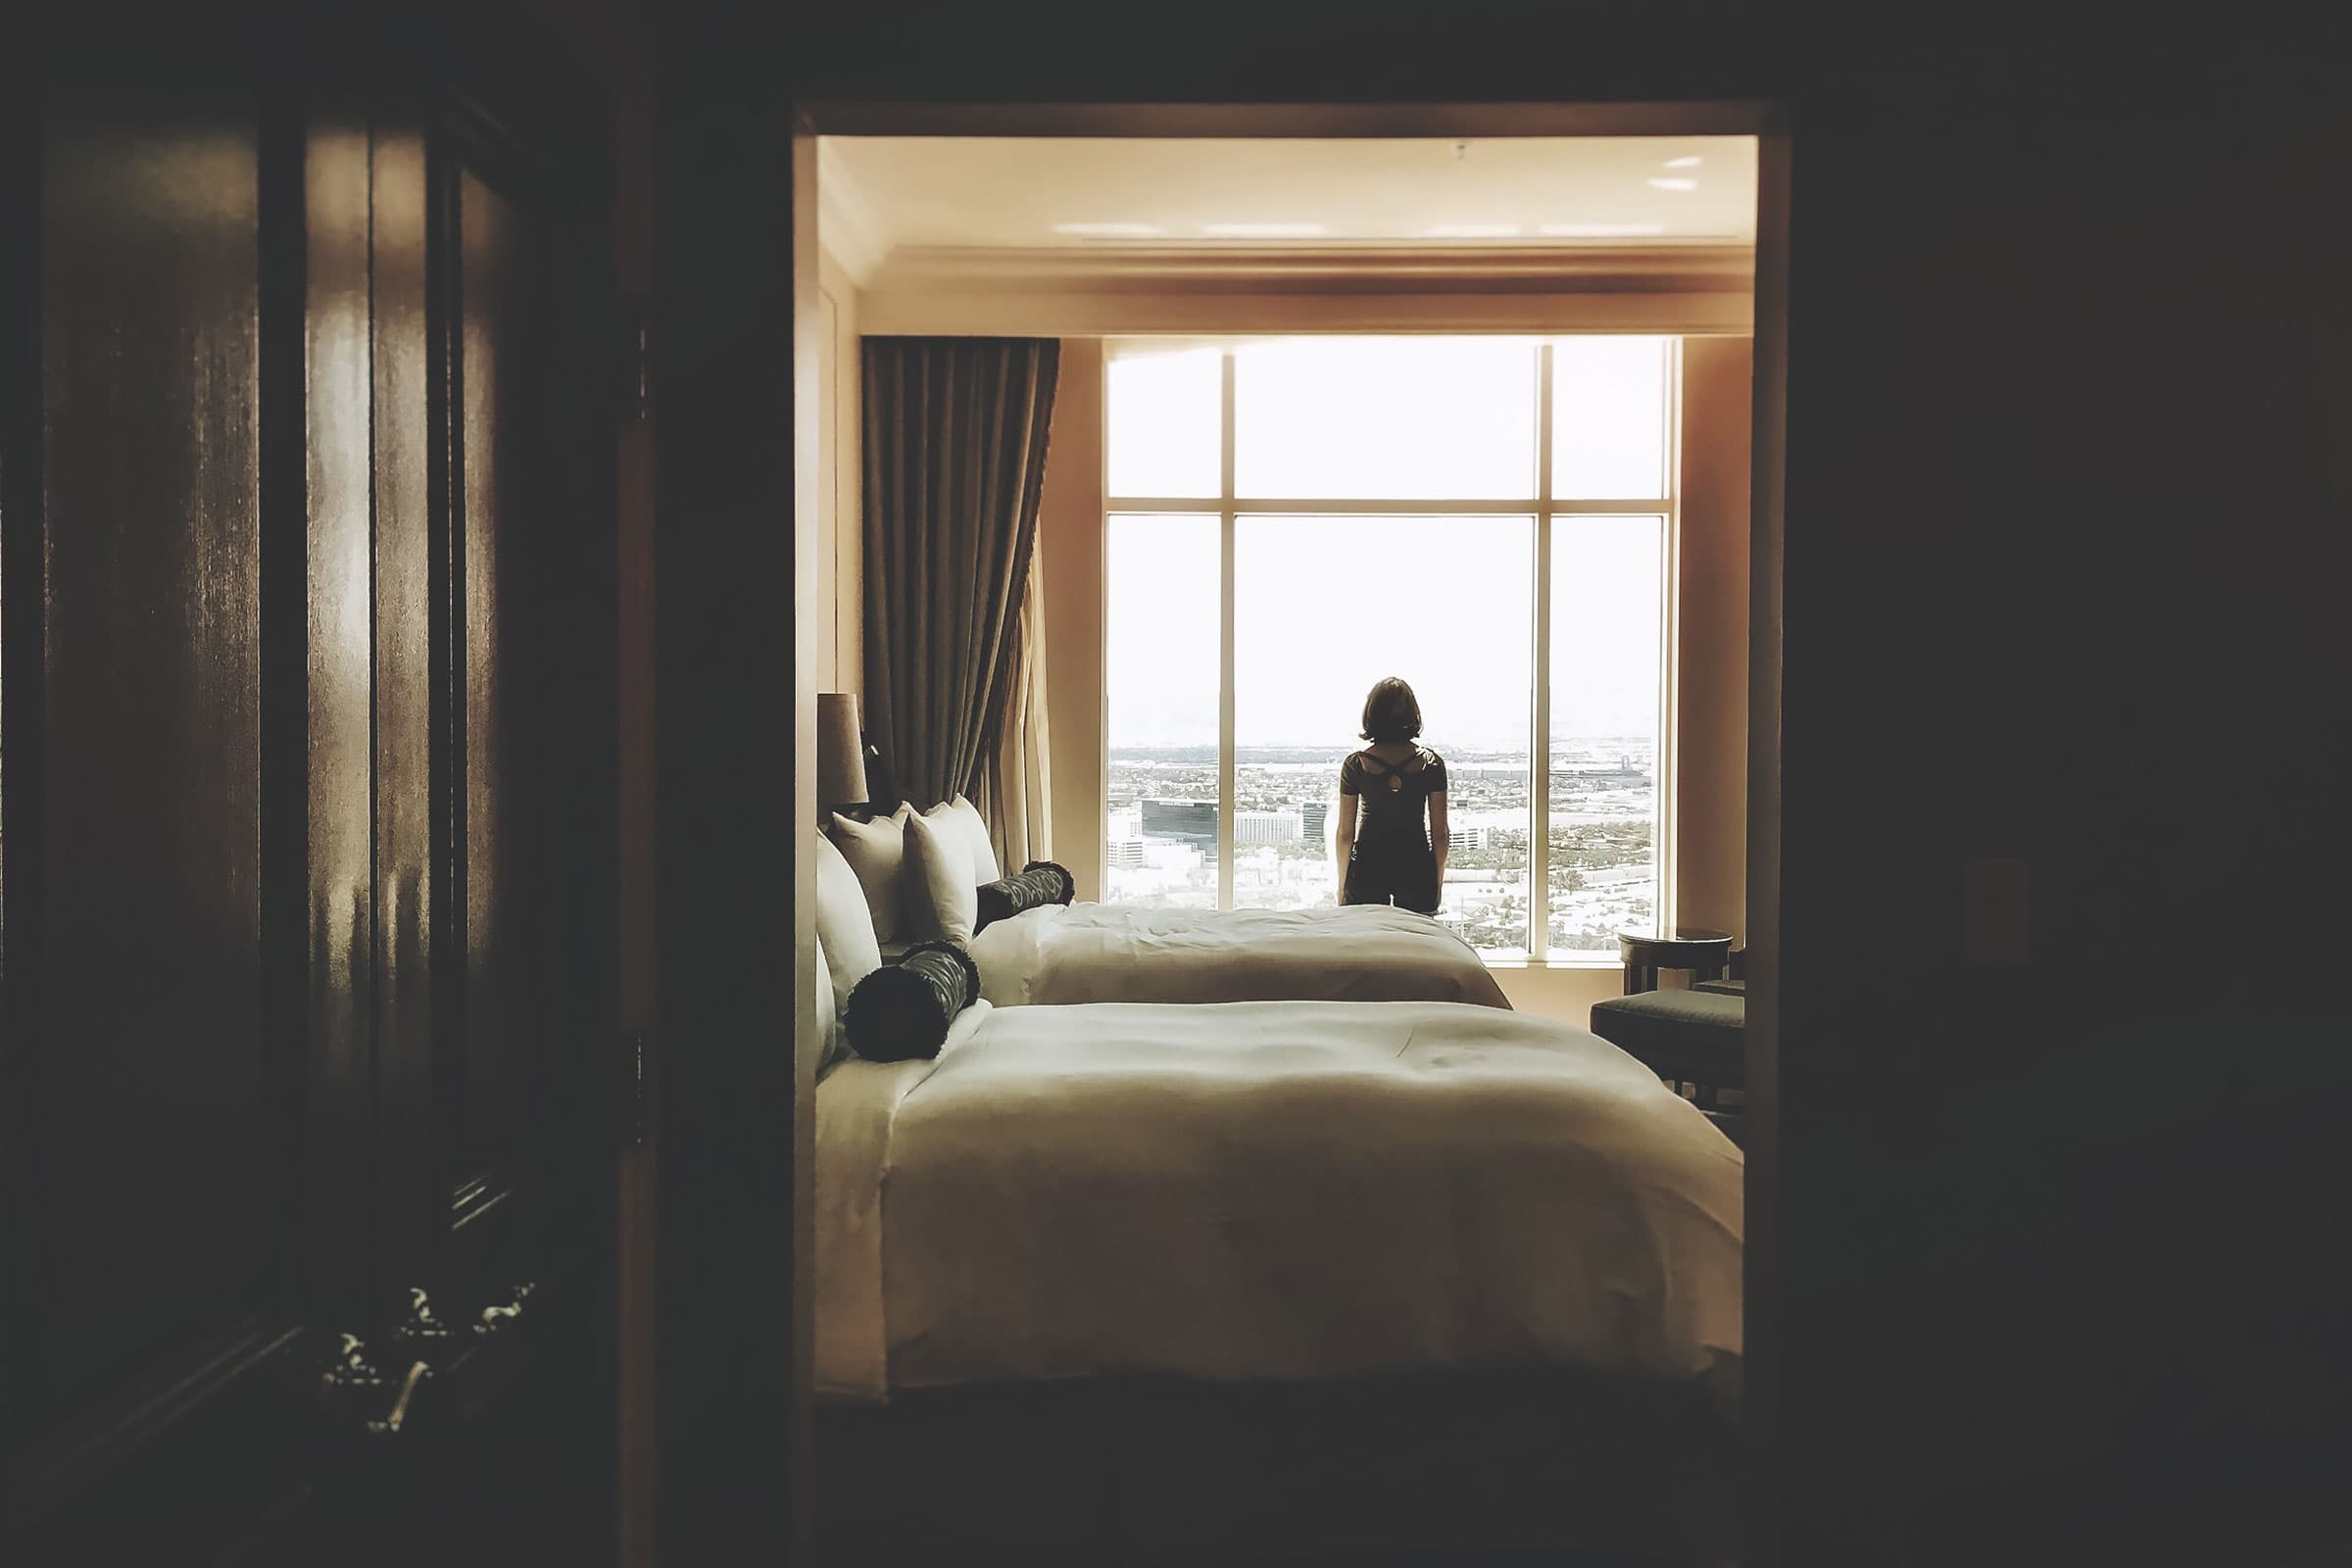 The guide to Malmö's best hotels